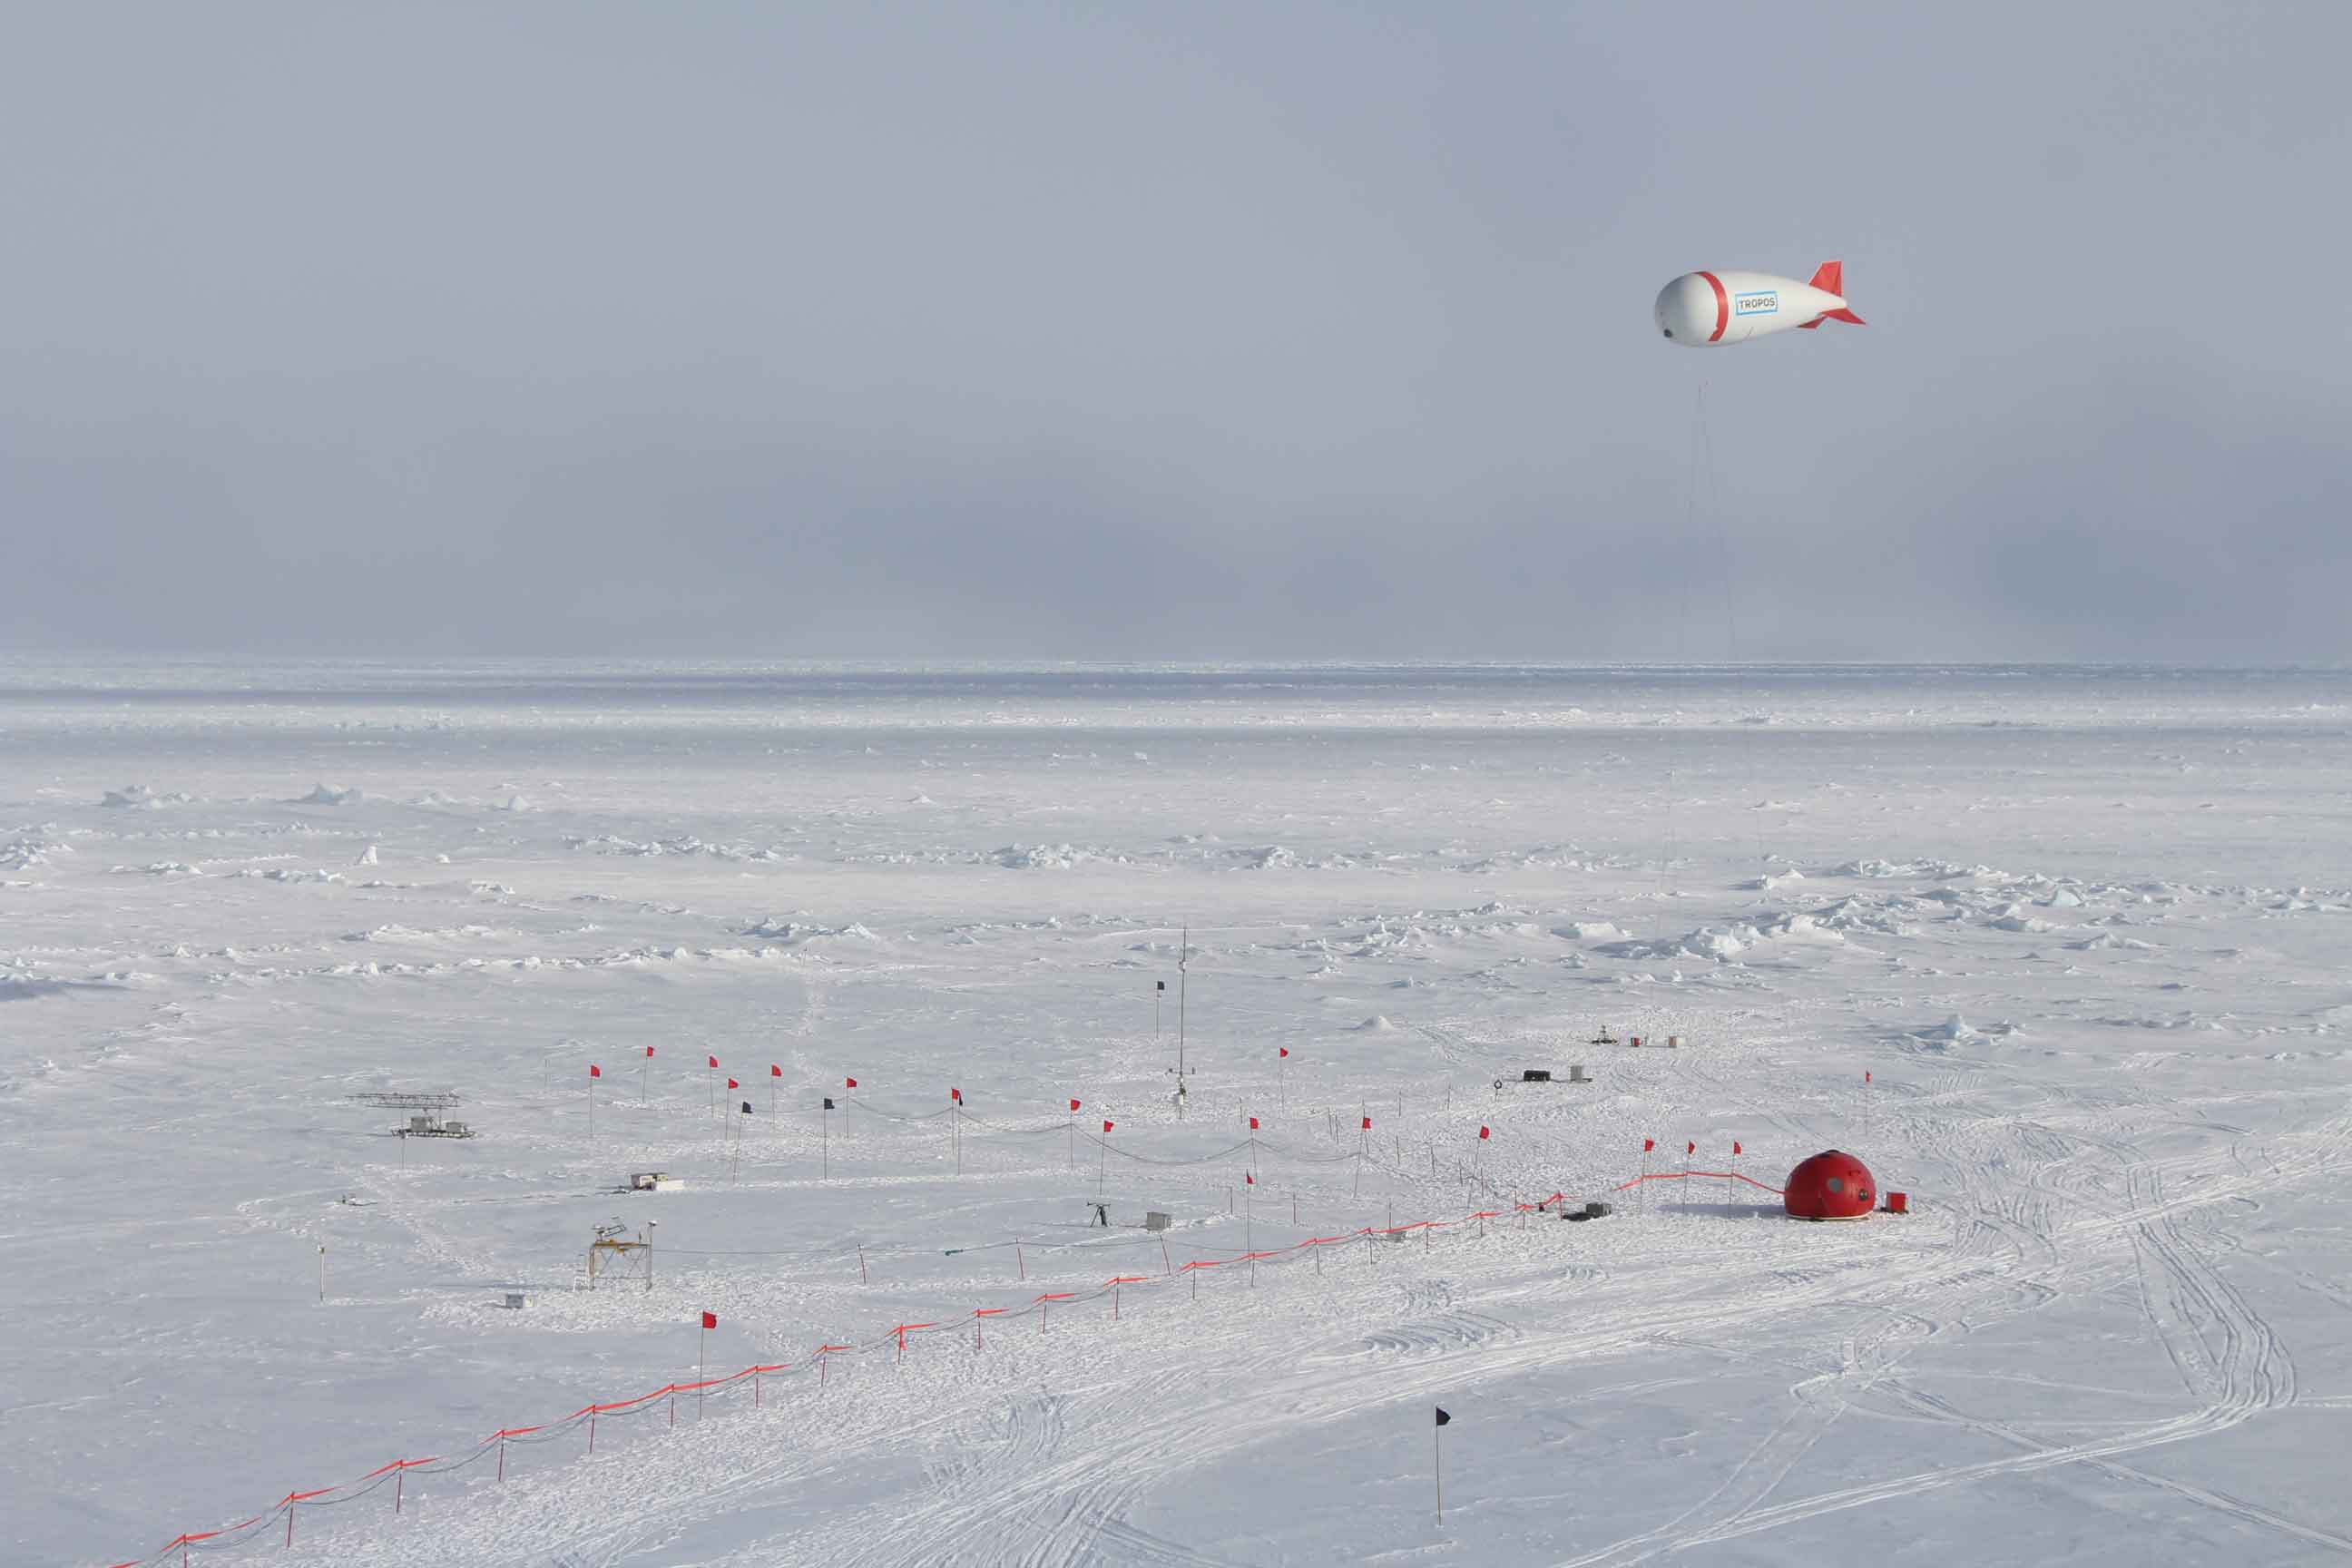 Meteorological station including tethered balloon at the ice camp during PASCAL.